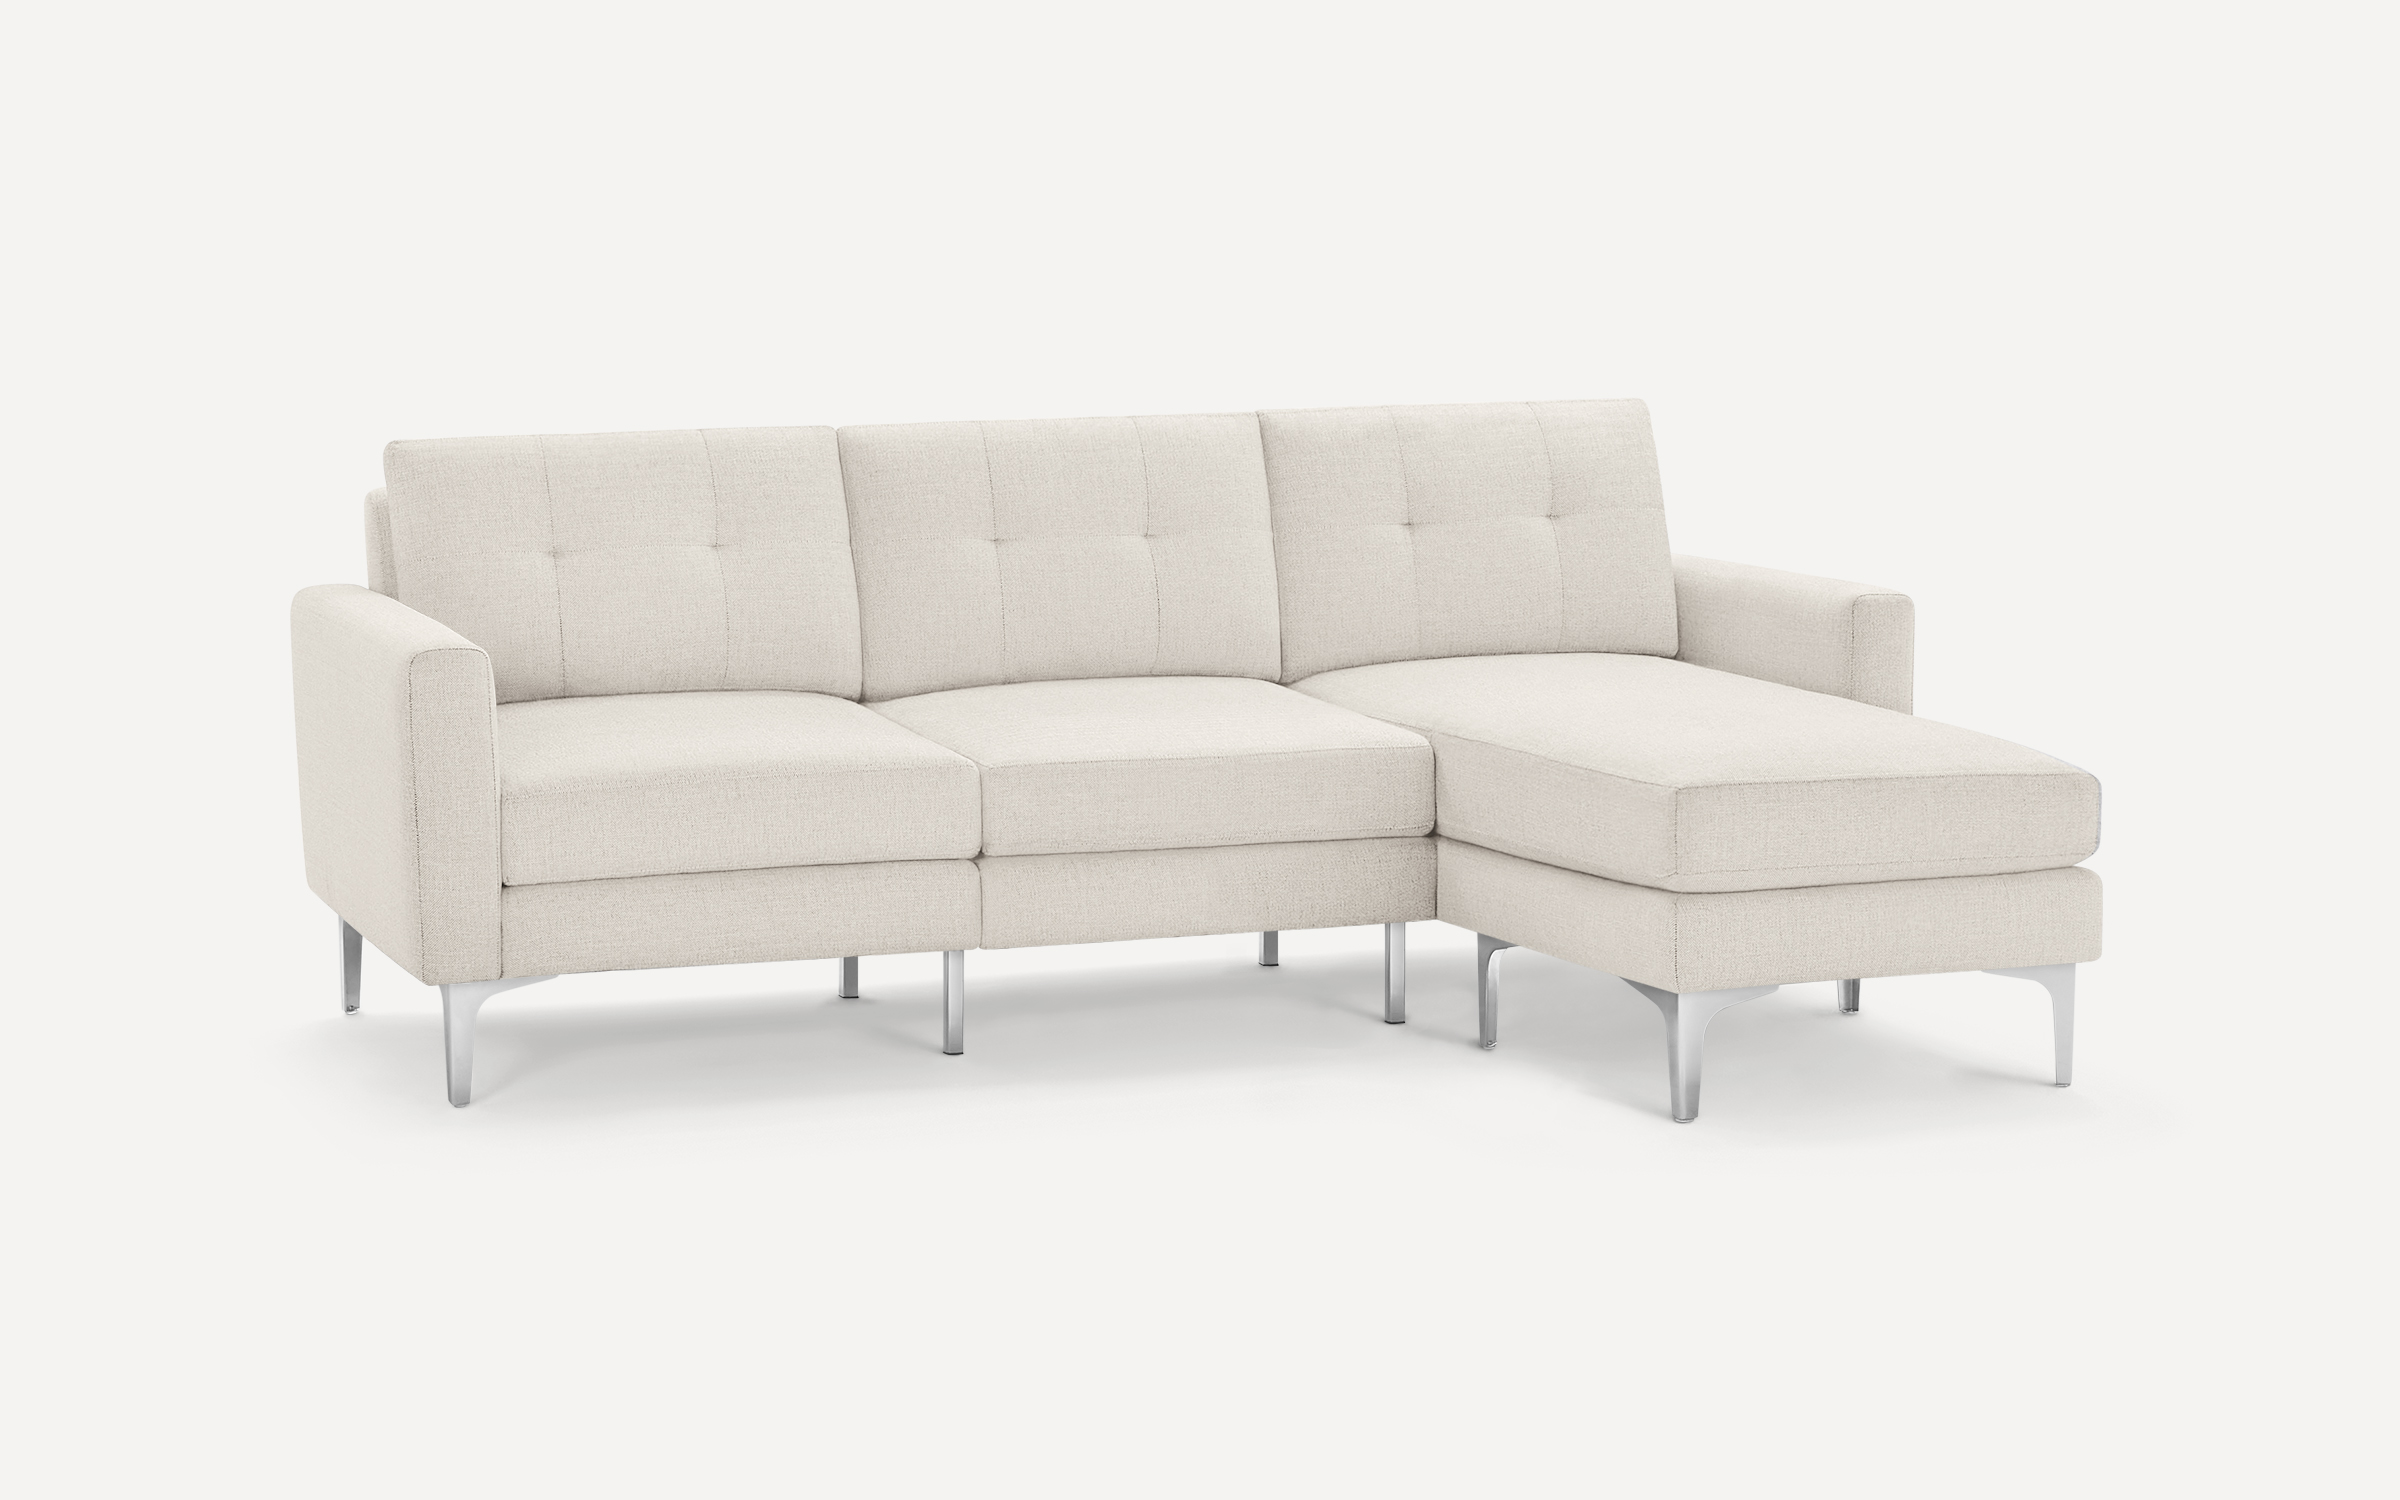 The Nomad Fabric Sectional Sofa Burrow